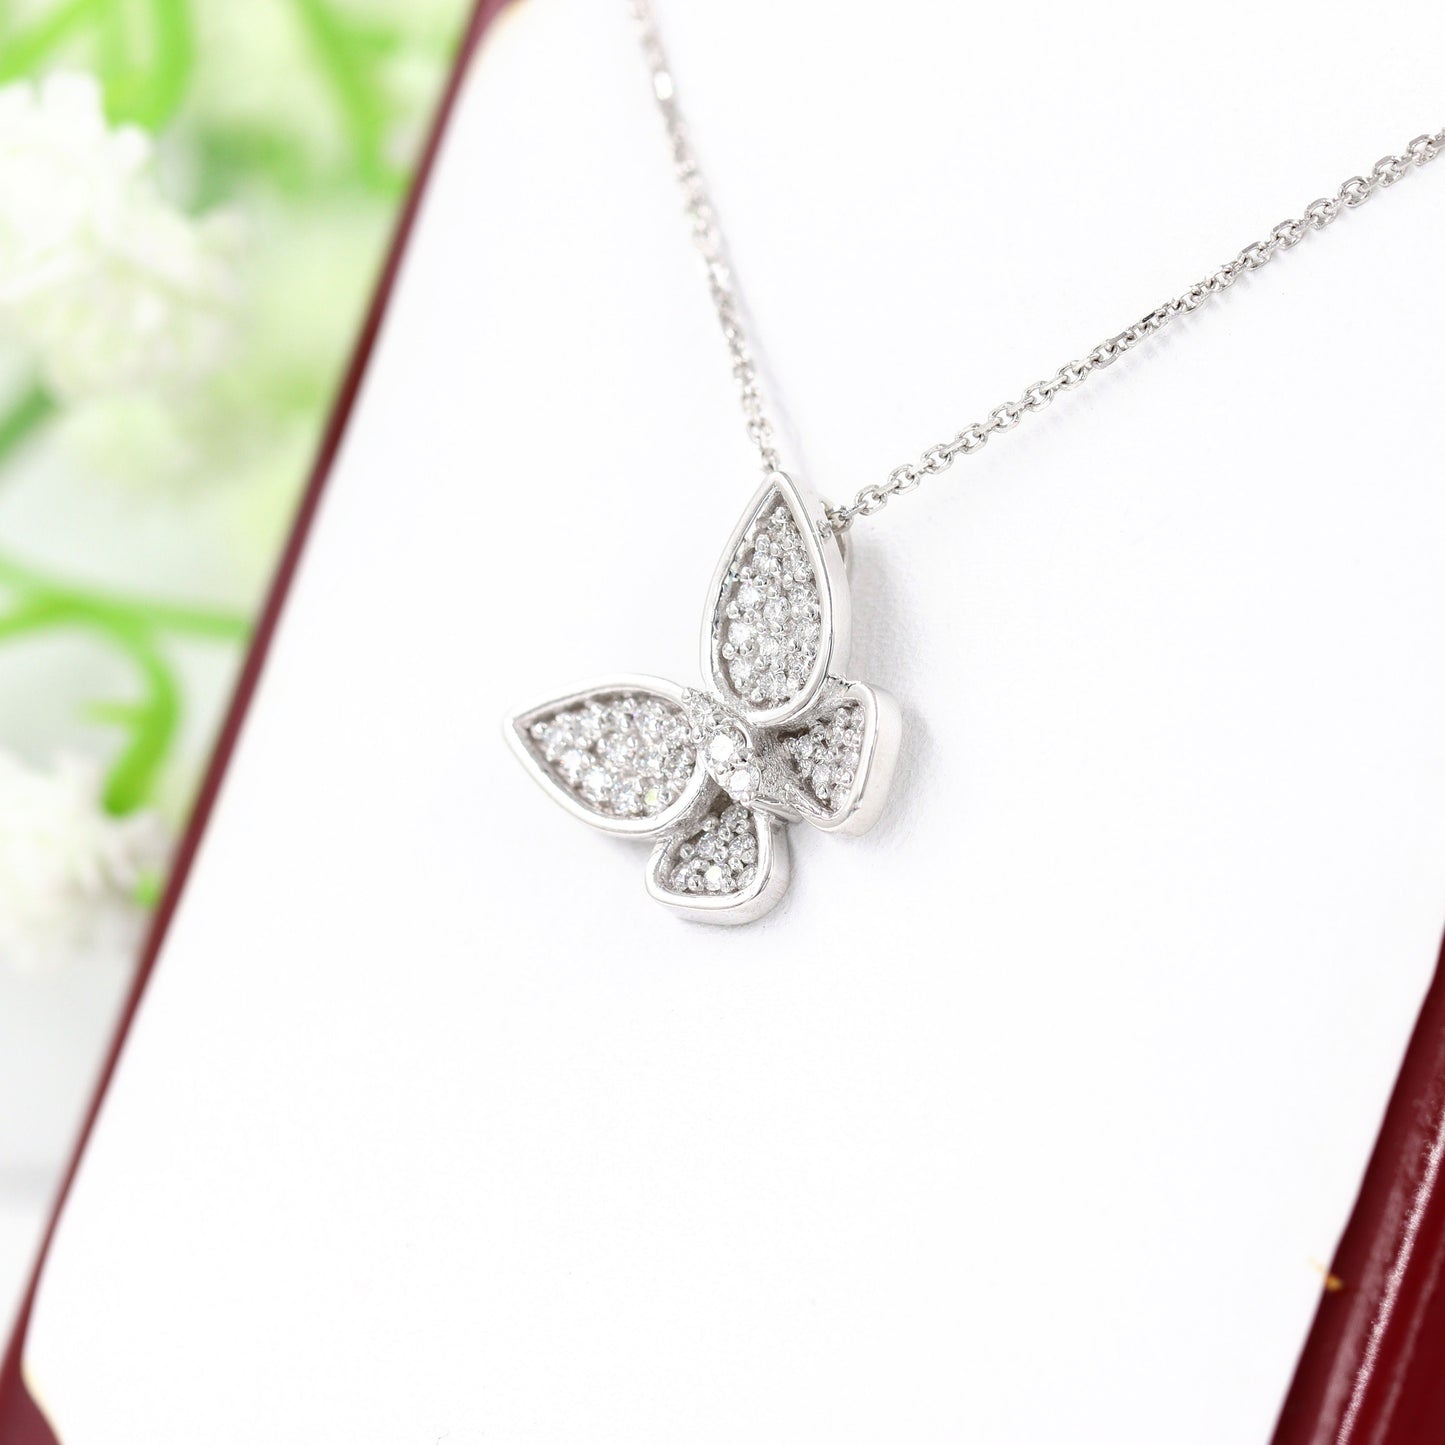 Diamond Necklace / Butterfly Charm Pendant / Unique Necklace / Natural Brilliant Round  Diamond Butterfly Charm / 14K Gold Necklace / Gift for her